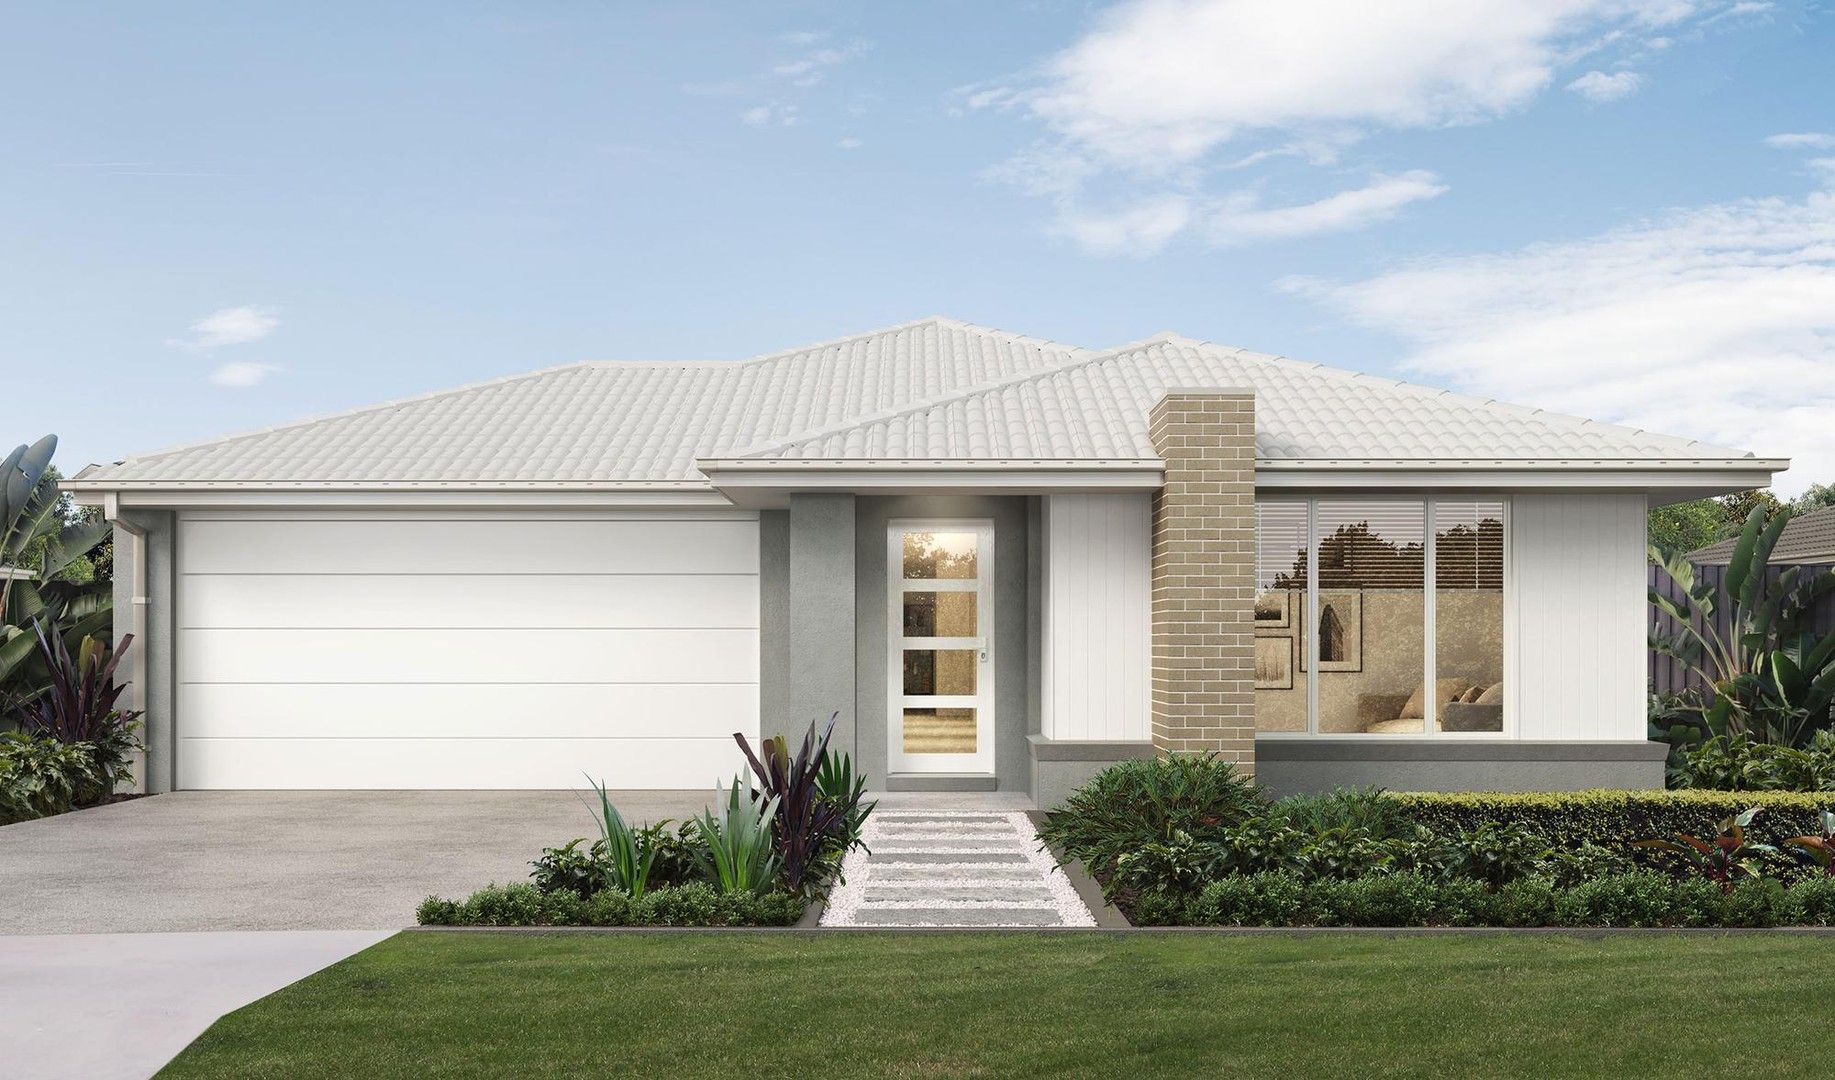 4 bedrooms New House & Land in 128 Rockrose Street LOGAN RESERVE QLD, 4133